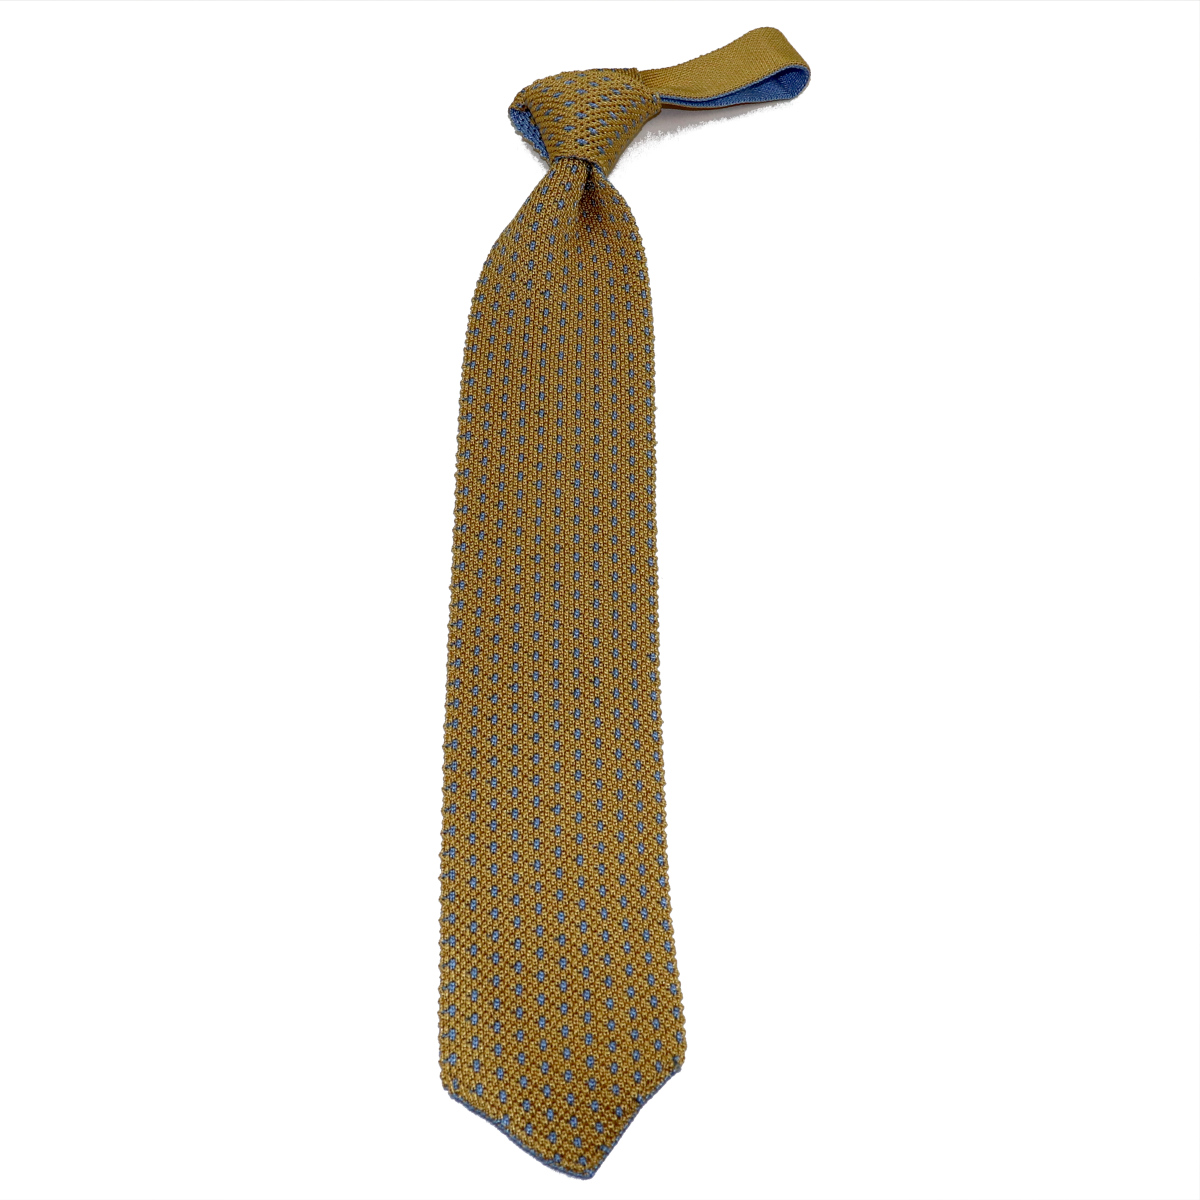 Tricot knitted silk tie, golden yellow background and light blue polka ...